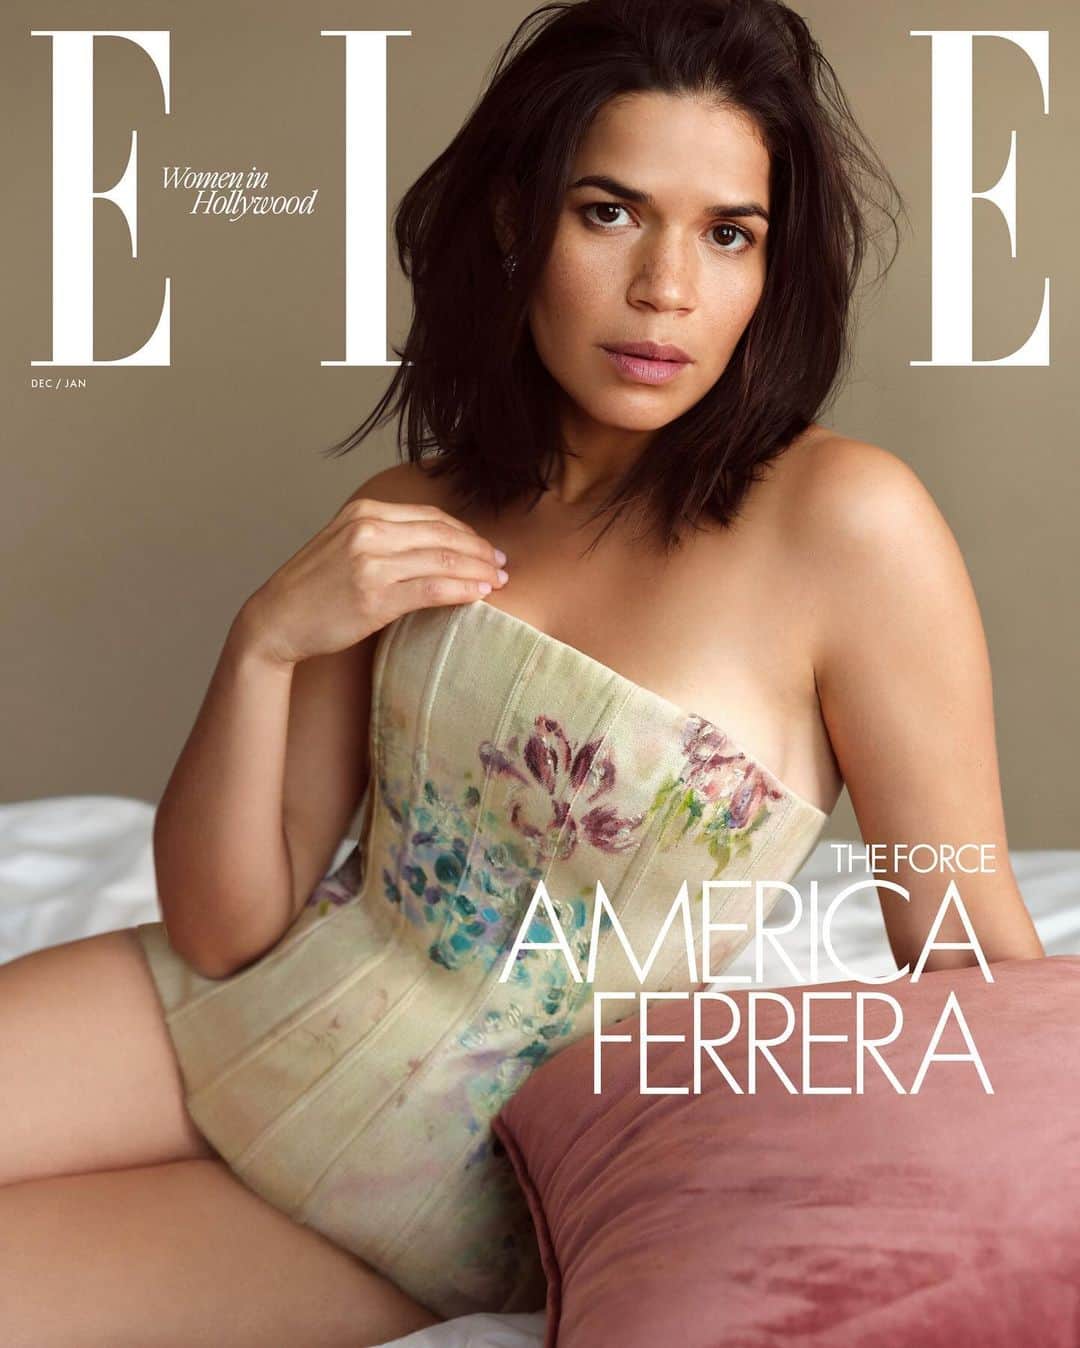 ニーナ・ガルシアのインスタグラム：「#ELLEWIH is back, and on Tuesday night Hollywood’s stars will gather to celebrate the achievements of nine strong women. To @elleusa, all nine detail their challenges and triumphs. #Barbie’s @americaferrera says, “I want to be more of who I am as a person, and to get to make art that isn’t about the dominant conversation people have wanted to have about me.” #Nyad’s #JodieFoster explains, “Unless you have that time as a regular person, you become stunted in so many ways. I accomplished a lot, but as a person, I was really behind. It’s a hard lesson to learn, because you have to look in the mirror and say, ’I failed a lot of people, and I wasn’t the person I could have been.’” Lily Gladstone, whose breakout performance in #KillersoftheFlowerMoon has earned Oscar buzz, shares, “A lot of my training has been about surrendering to the moment, and it’s a good life lesson that you can apply to just about anything. A lot of it is just being present and accepting what you have. I think if you’re going to have any longevity in a field like this.” Read more at the link in bio. — Our editors worked directly with the Screen Actors Guild during its recent strike to make sure we could honor women in Hollywood while still adhering to union guidelines. — Photographers: @zoeygrossman @markseliger Stylists: @alexwhiteedits @ariannephillips Writers: @kaylaw @saradaustin @teresemariem Hair: @jennychohair @aframe_agency @hairbyadir @bobrecine @thewallgroup Makeup: @georgieeisdell @thewallgroup @patidubroff @chanel.beauty @romyglow Manicure: @ashlie_johnson @caseynails @thewallgroup Production: @lolaproduction @boomboomlevy Set design: @jakobbokulich On location: @thehollywoodroosevelt」